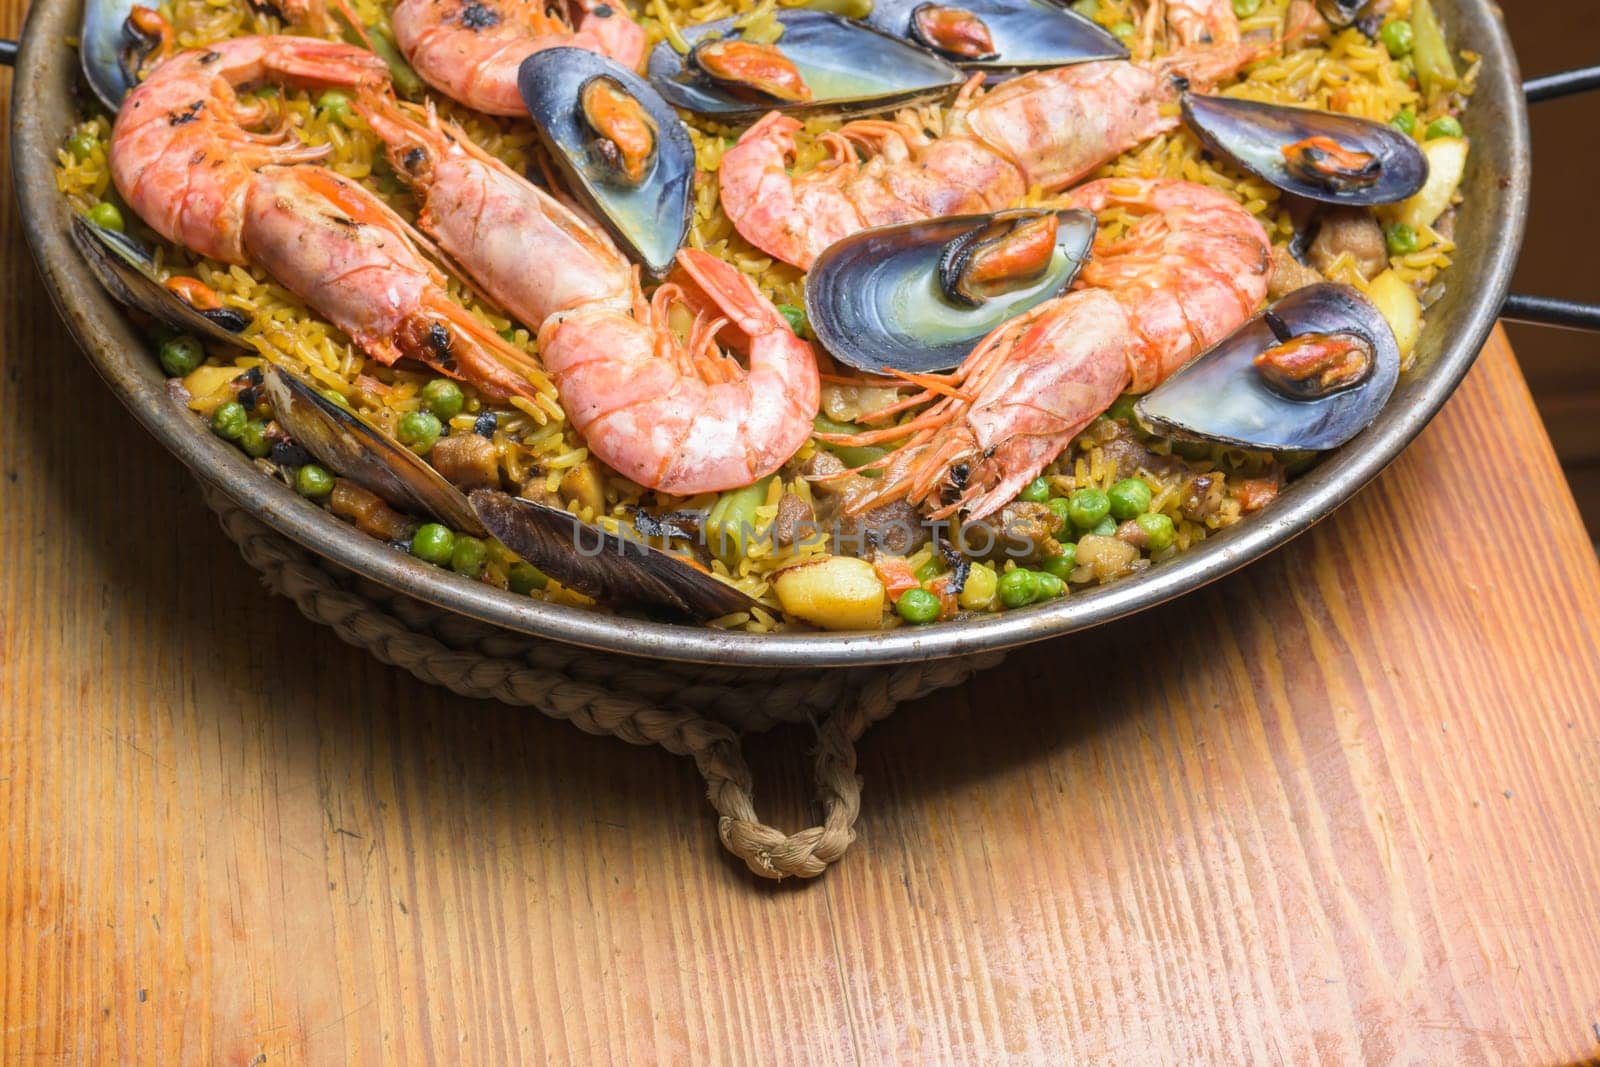 Traditional Spanish paella full of seafood on a wooden stand in a kitchen setting, typical Spanish cuisine, Majorca, Balearic Islands, Spain by carlosviv